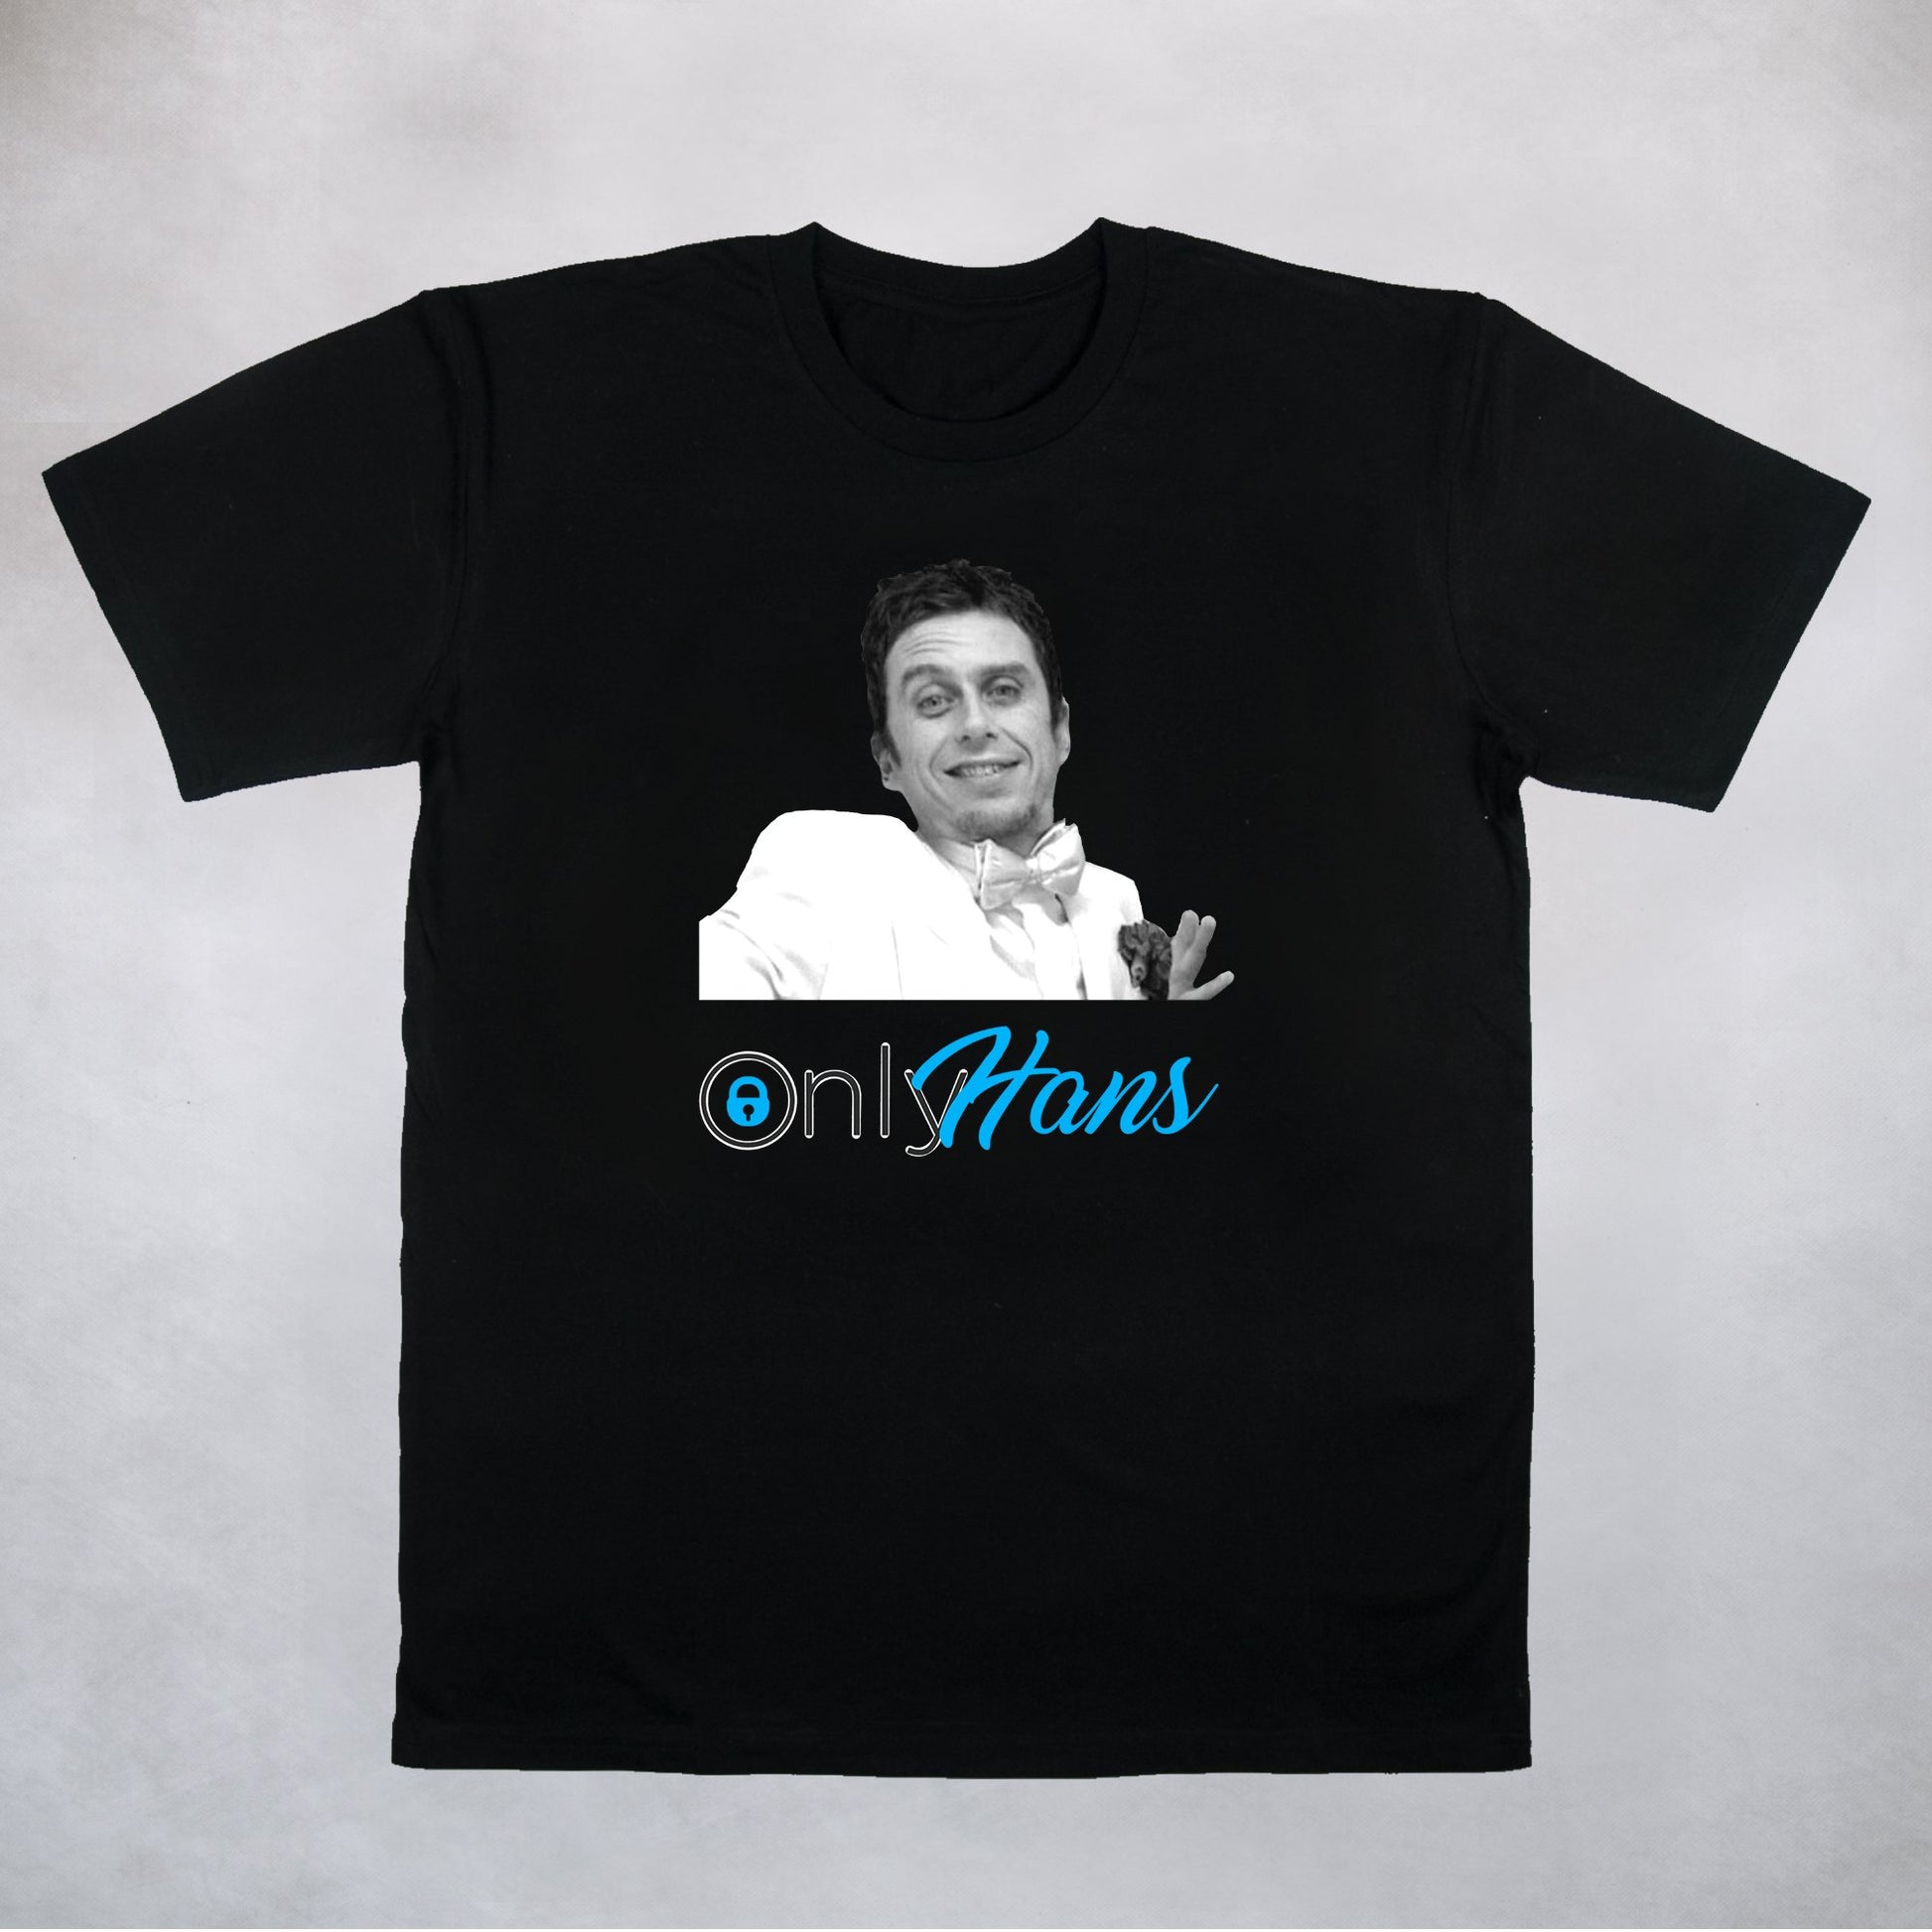 Classy Duds Short Sleeve T-Shirts S / Black / Standard Only Hans Tee